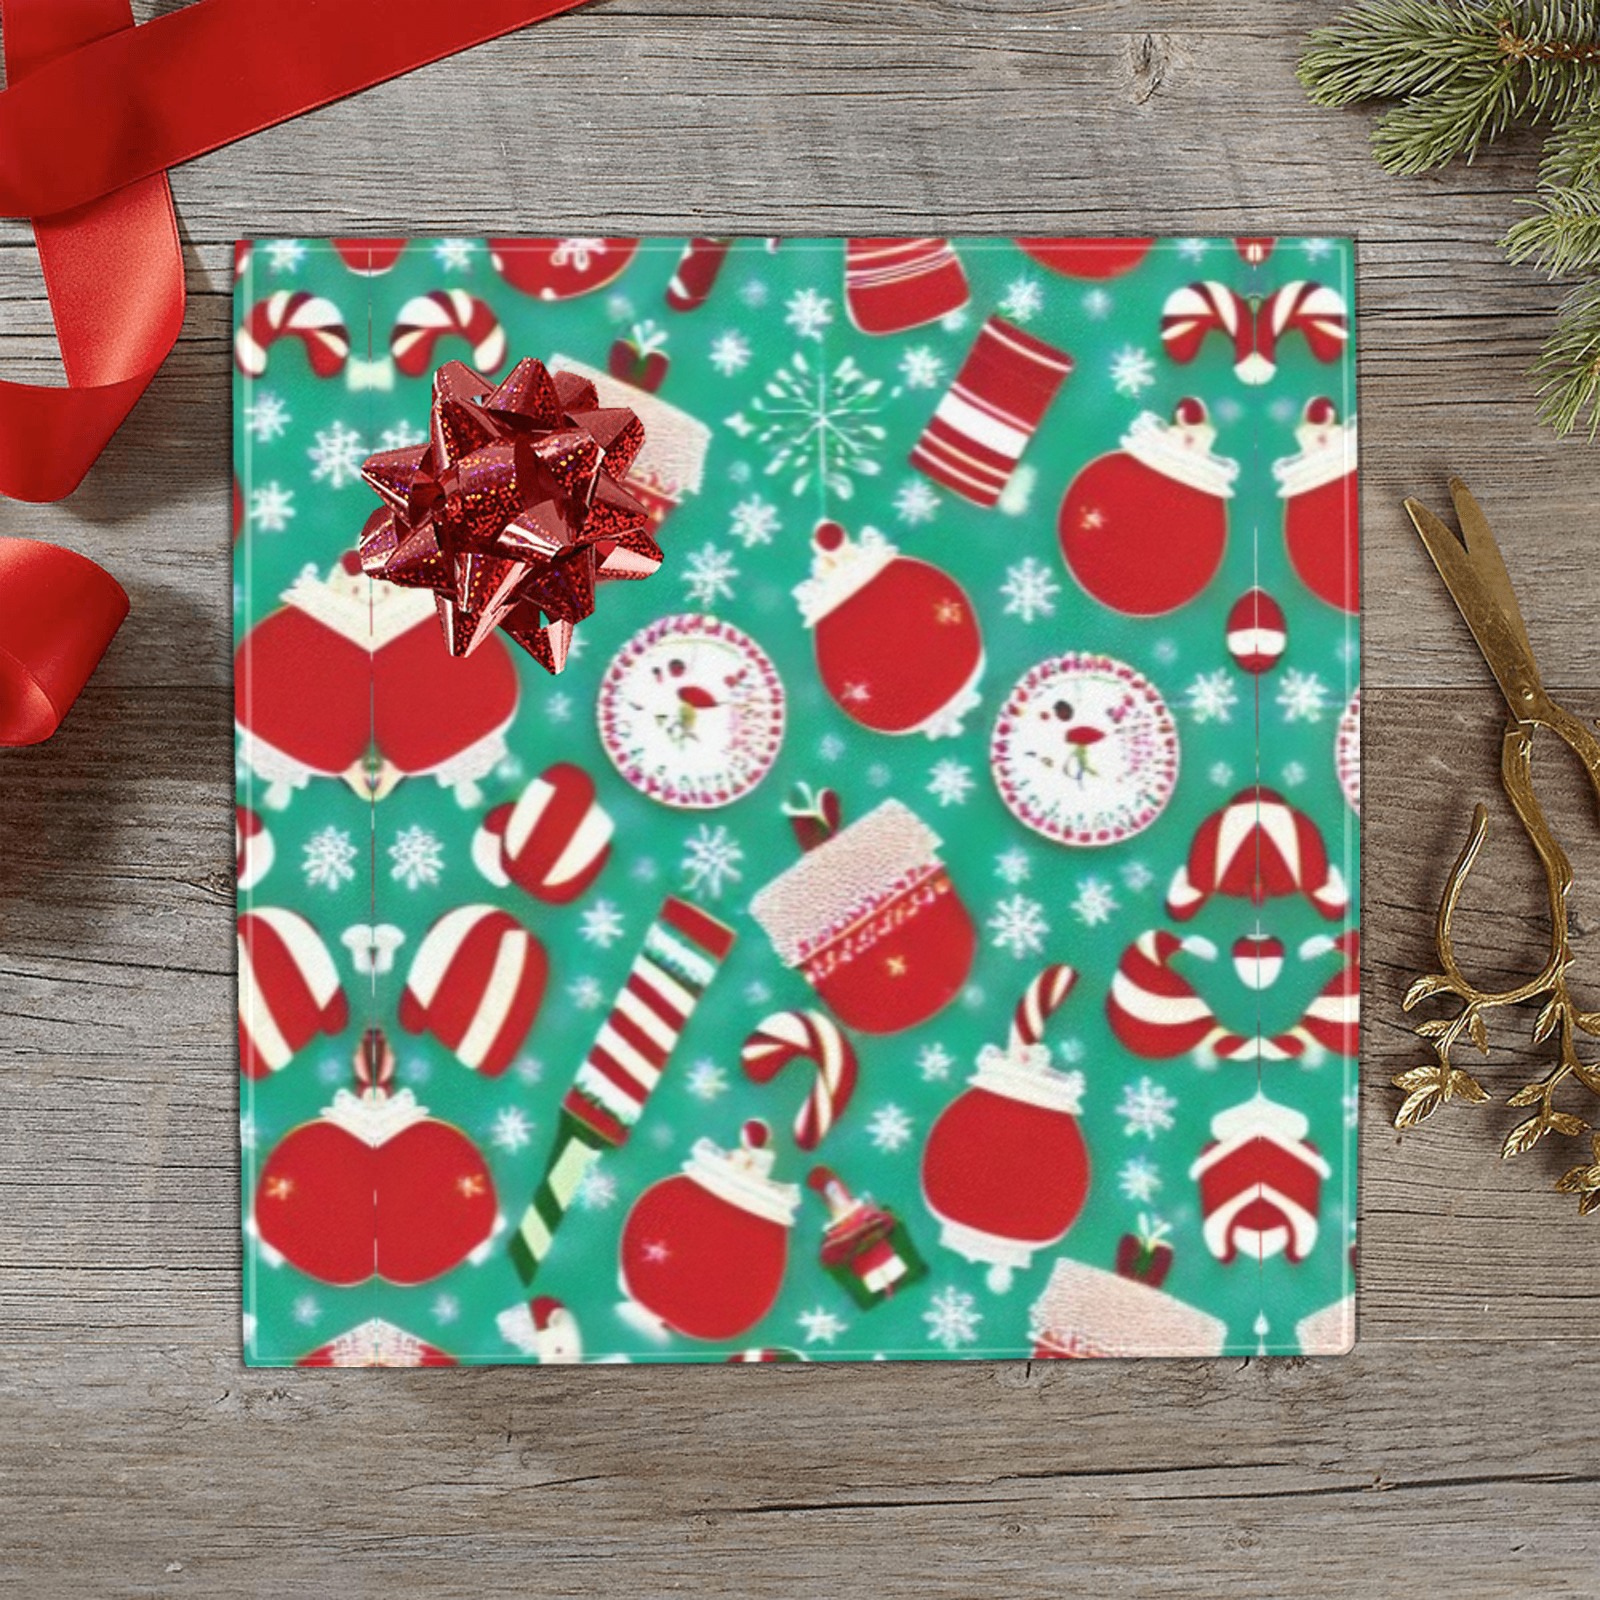 c12 Gift Wrapping Paper 58"x 23" (1 Roll)